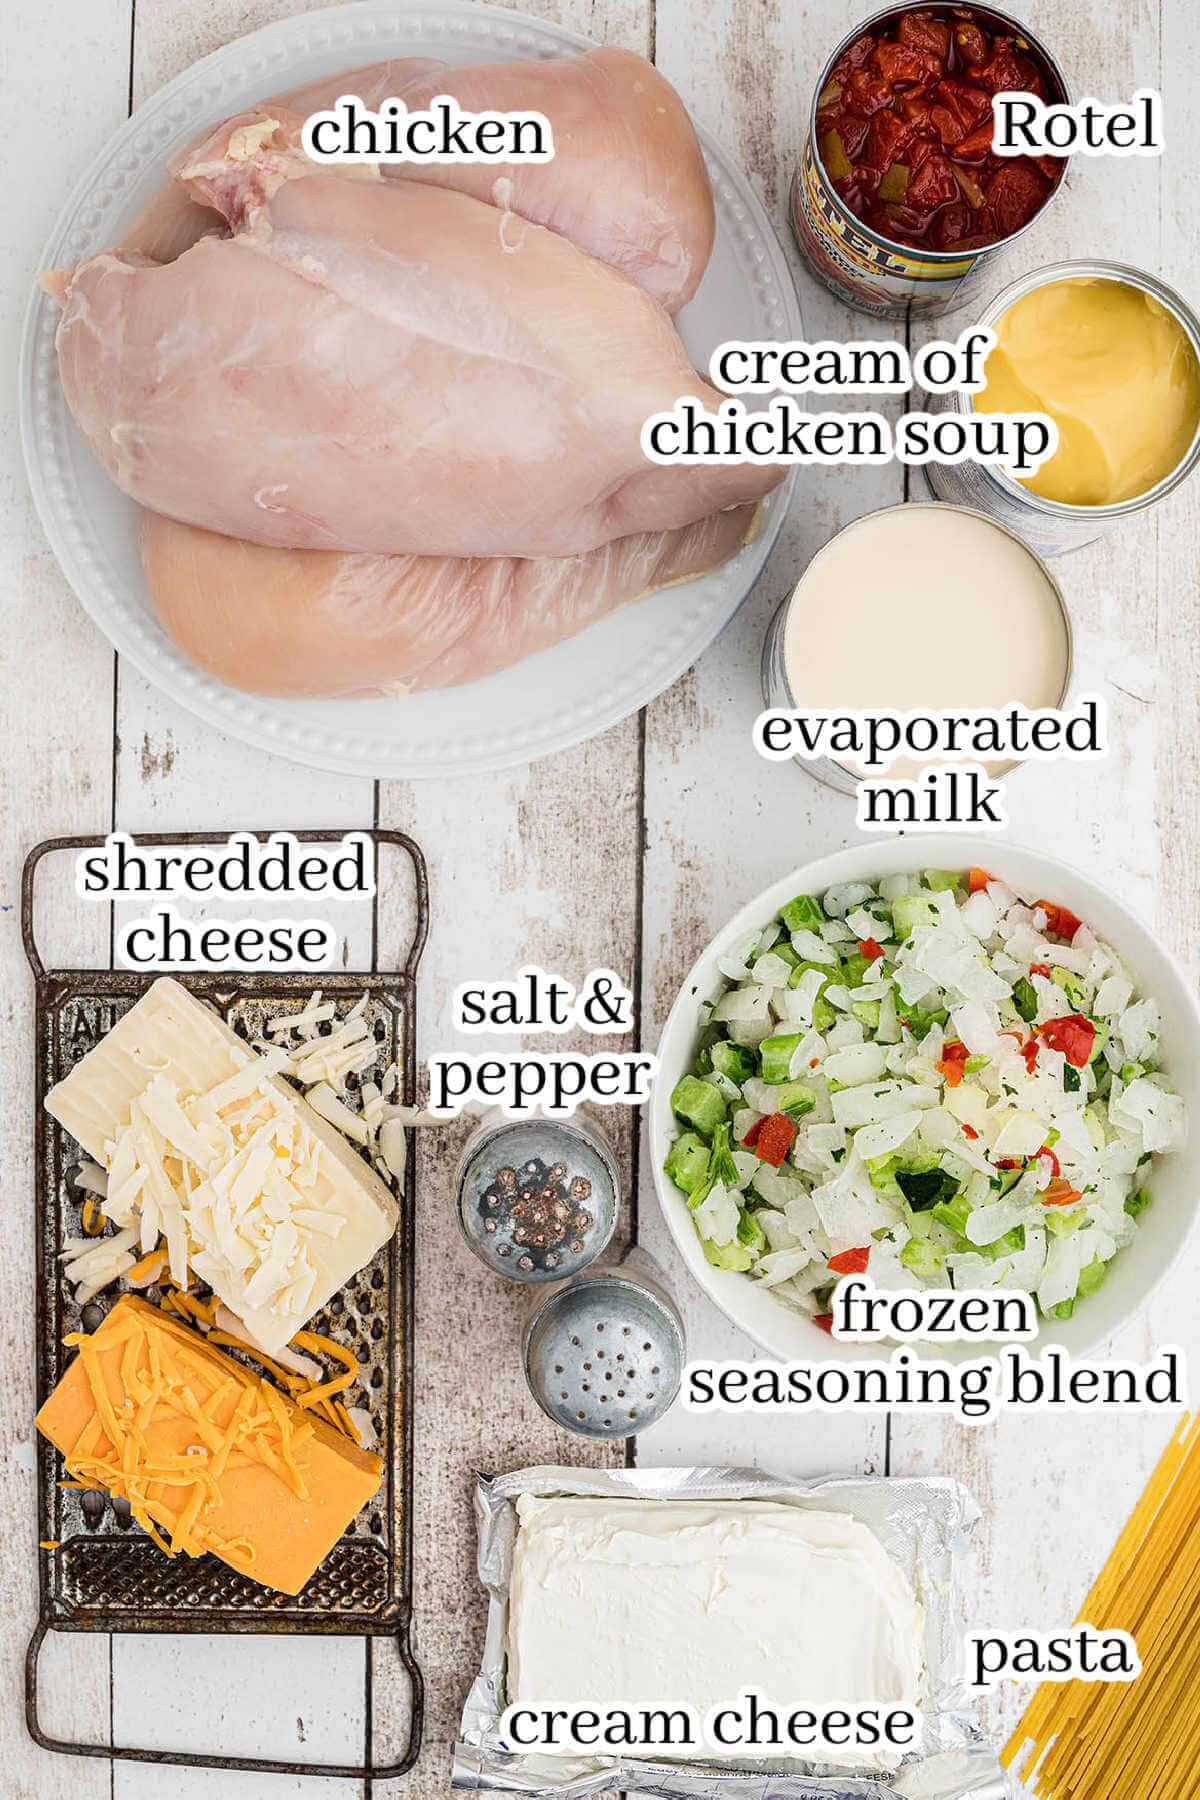 Ingredients to make slow cooker recipe, with print overlay.